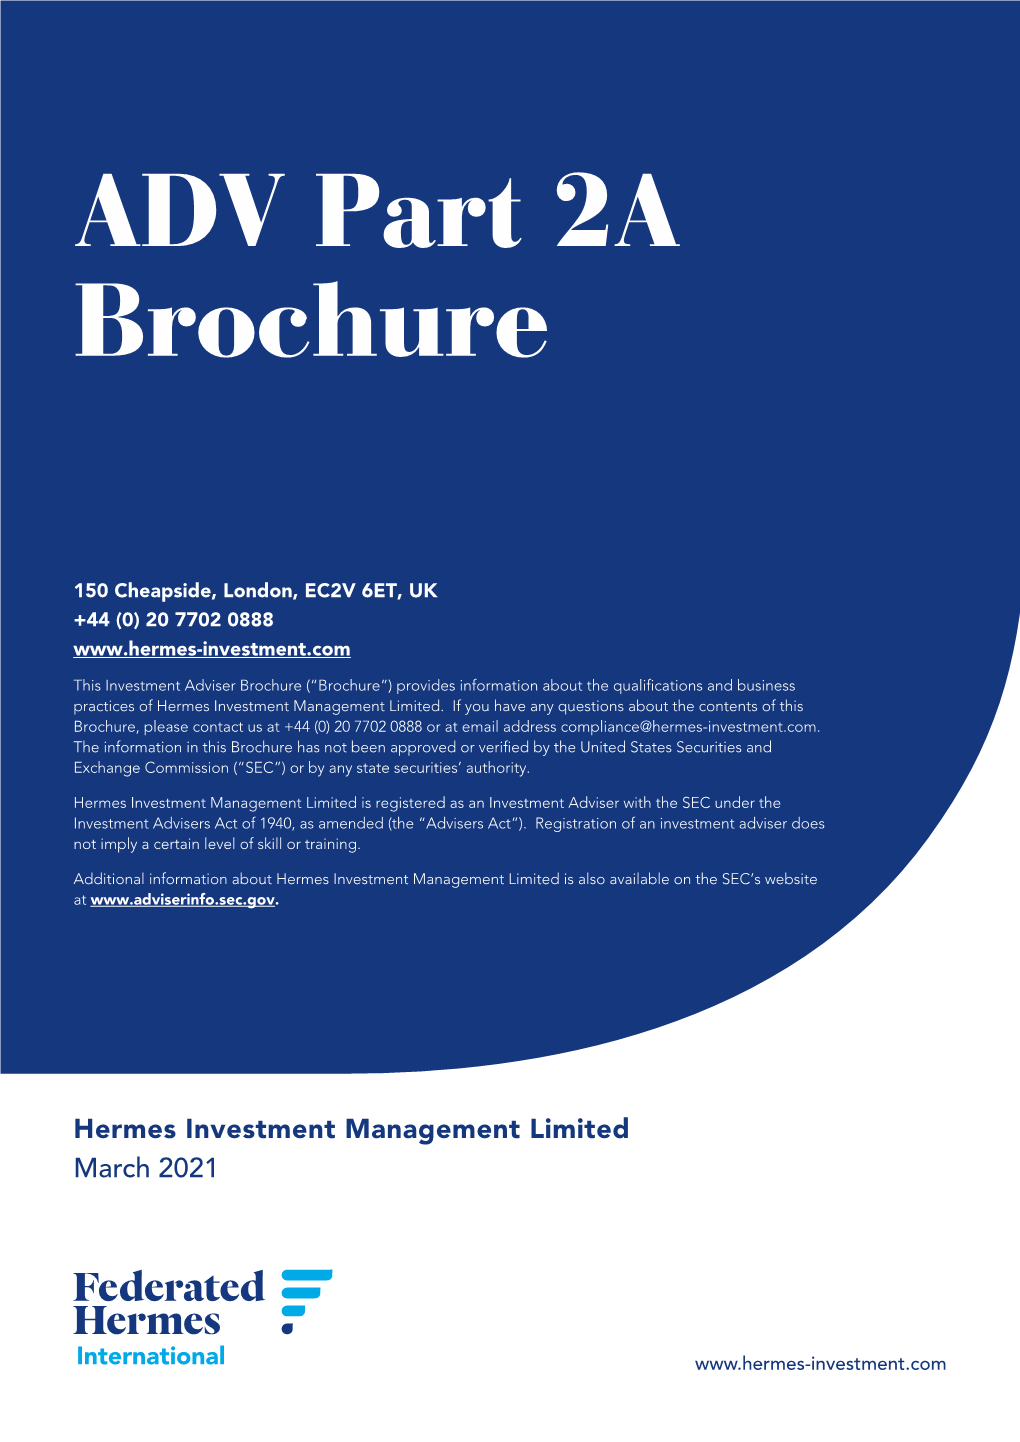 Formation About the Qualifications and Business Practices of Hermes Investment Management Limited